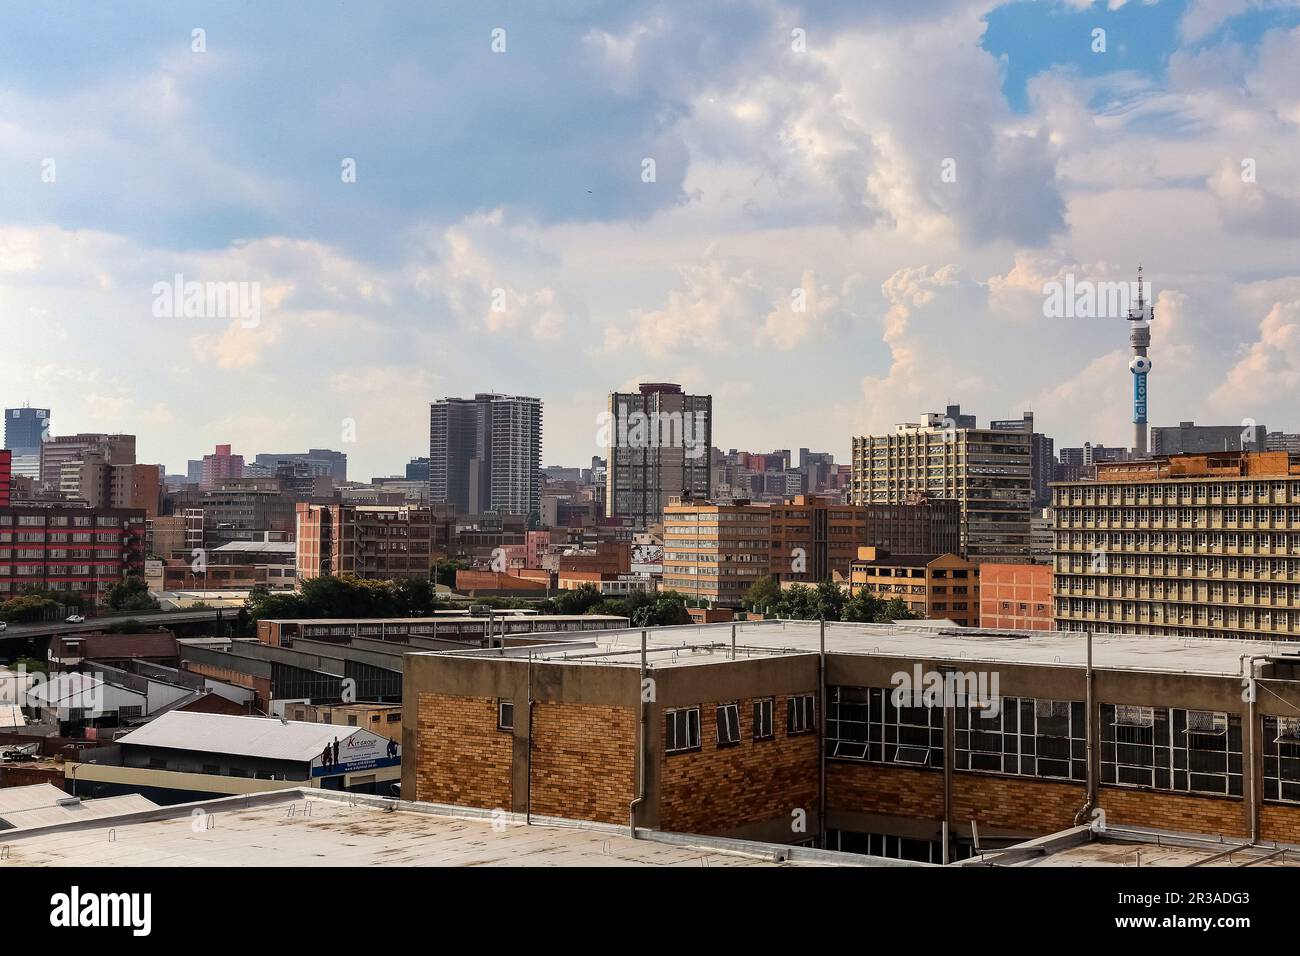 View of Johannesburg Central Business District buildings and landmarks Stock Photo